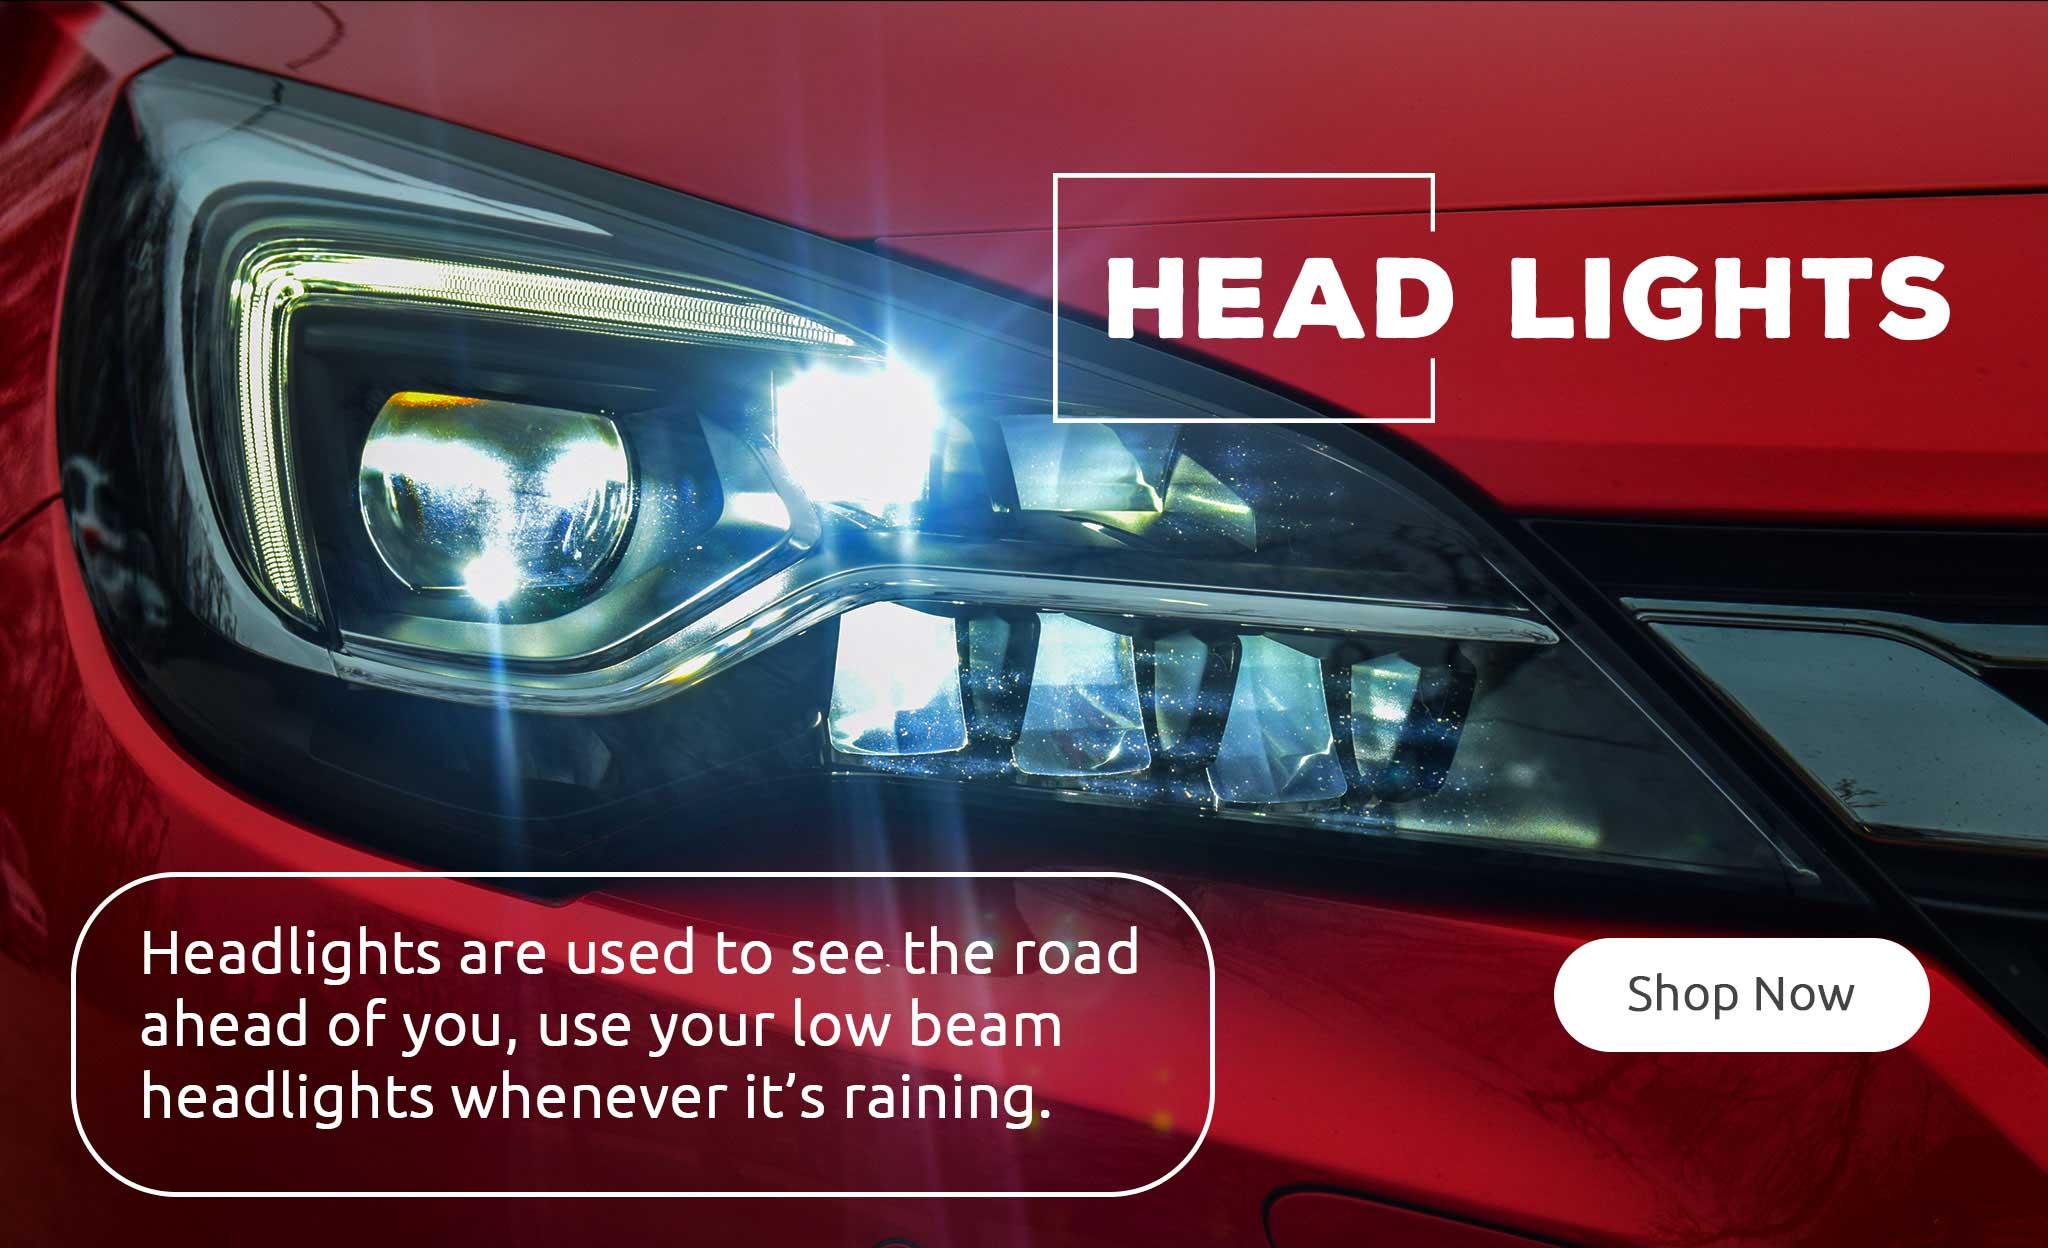 Head lights are used to see the road ahead of you, use your low beam head lights whenever its raining.